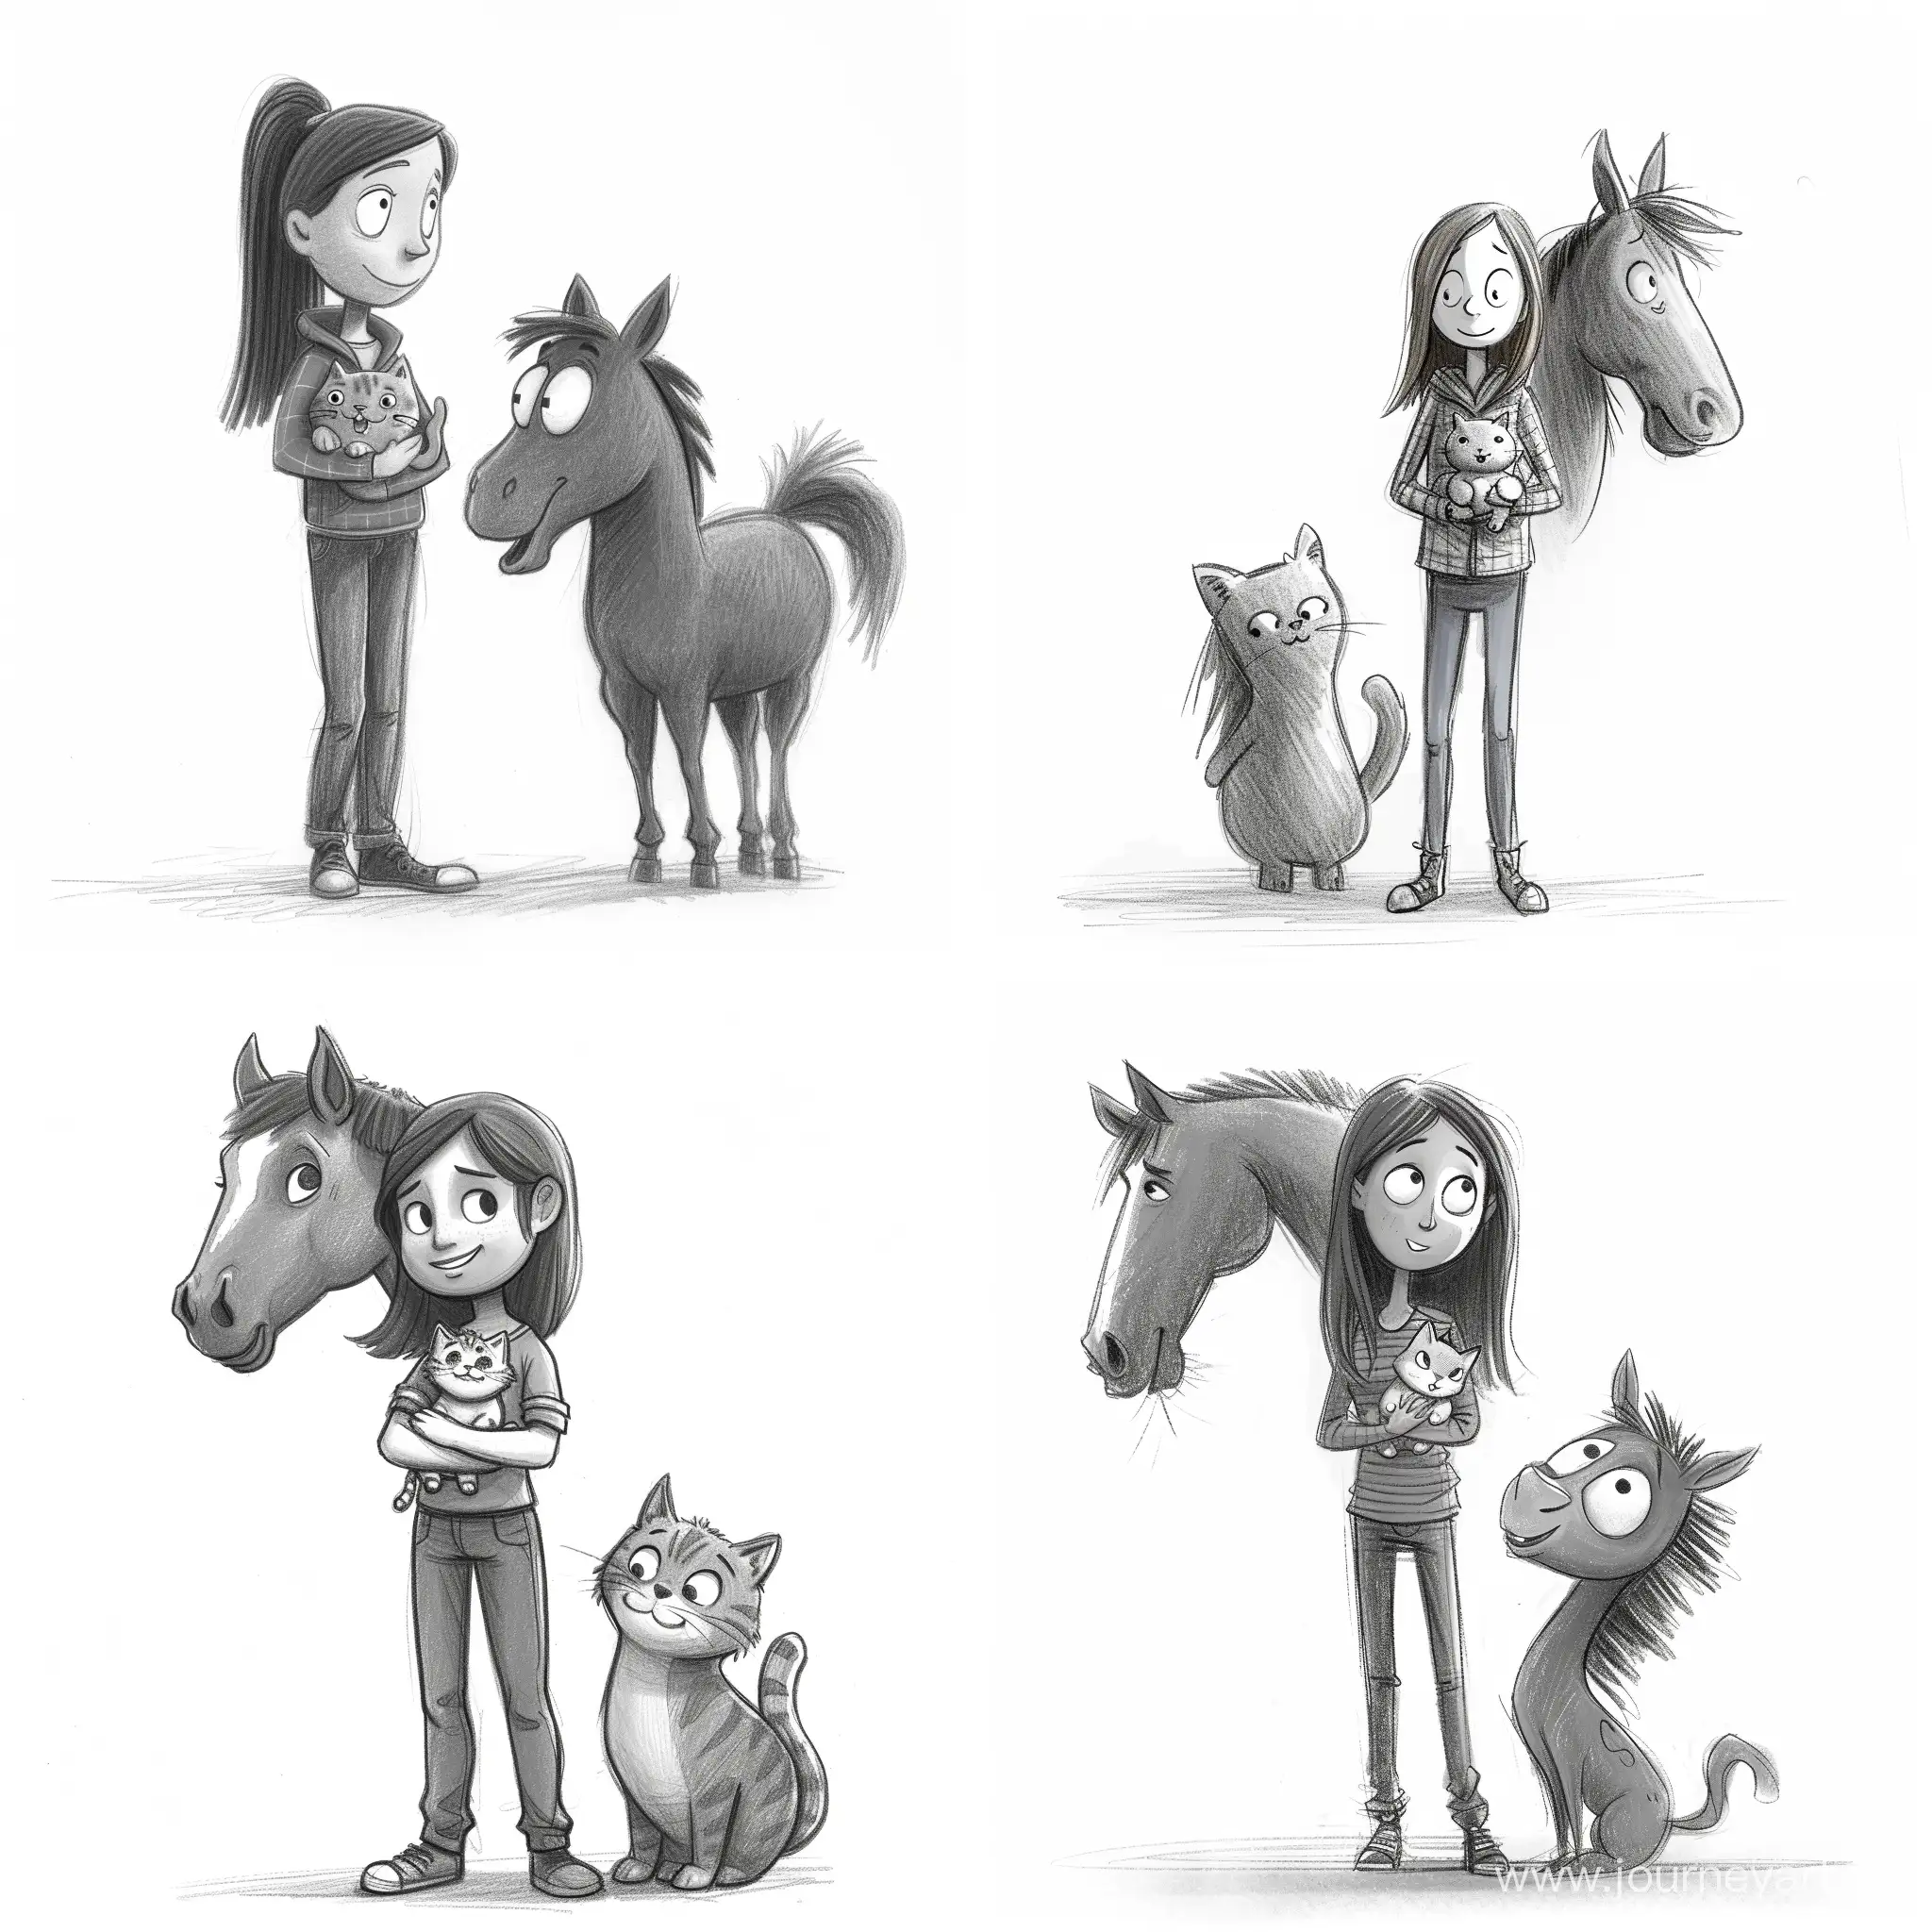 Whimsical-Pencil-Cartoon-Young-Woman-with-Happy-Cat-and-Amused-Horse